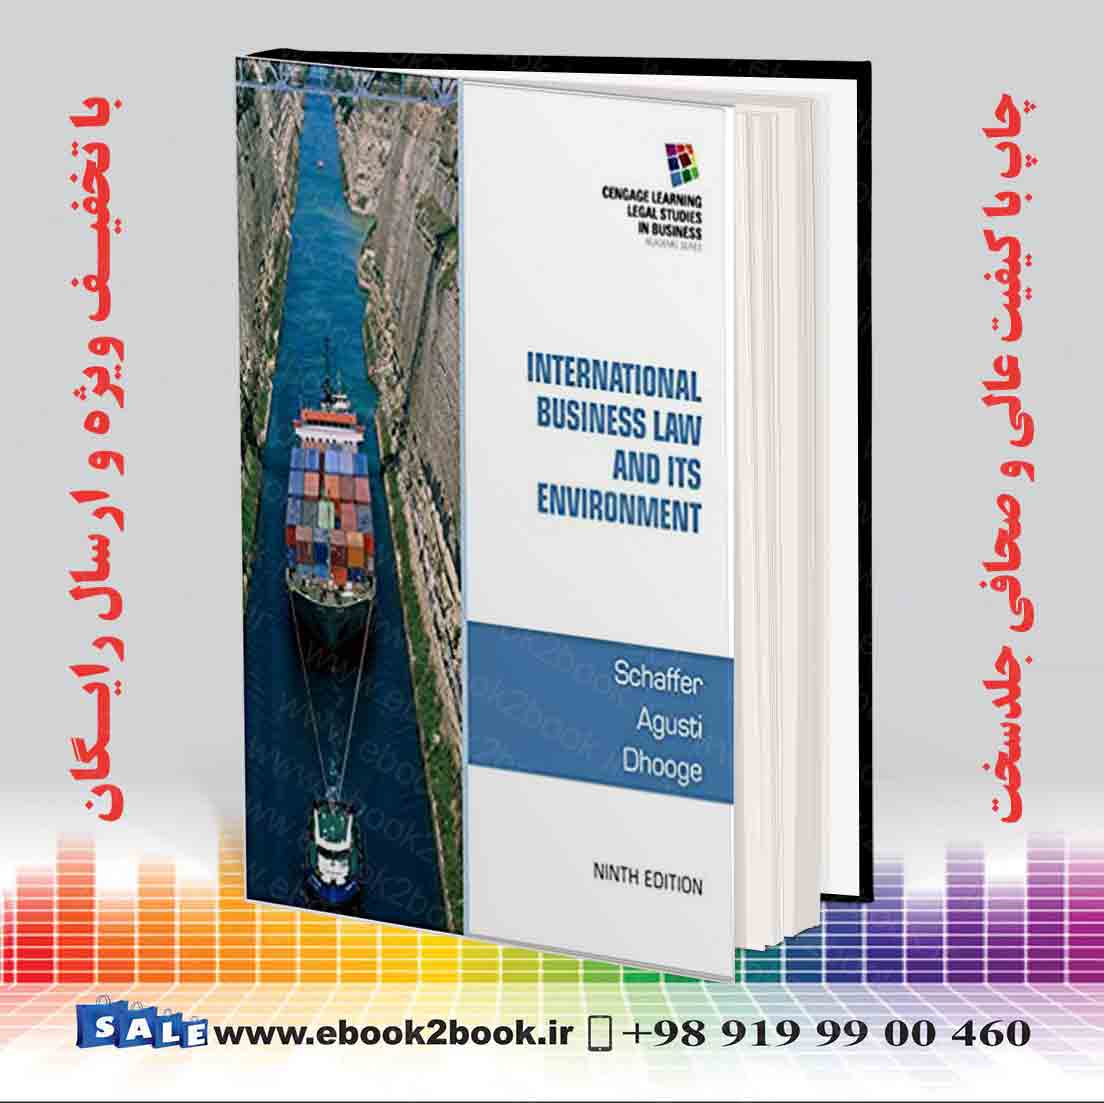 International Business Law and Its Environment, 9th Edition